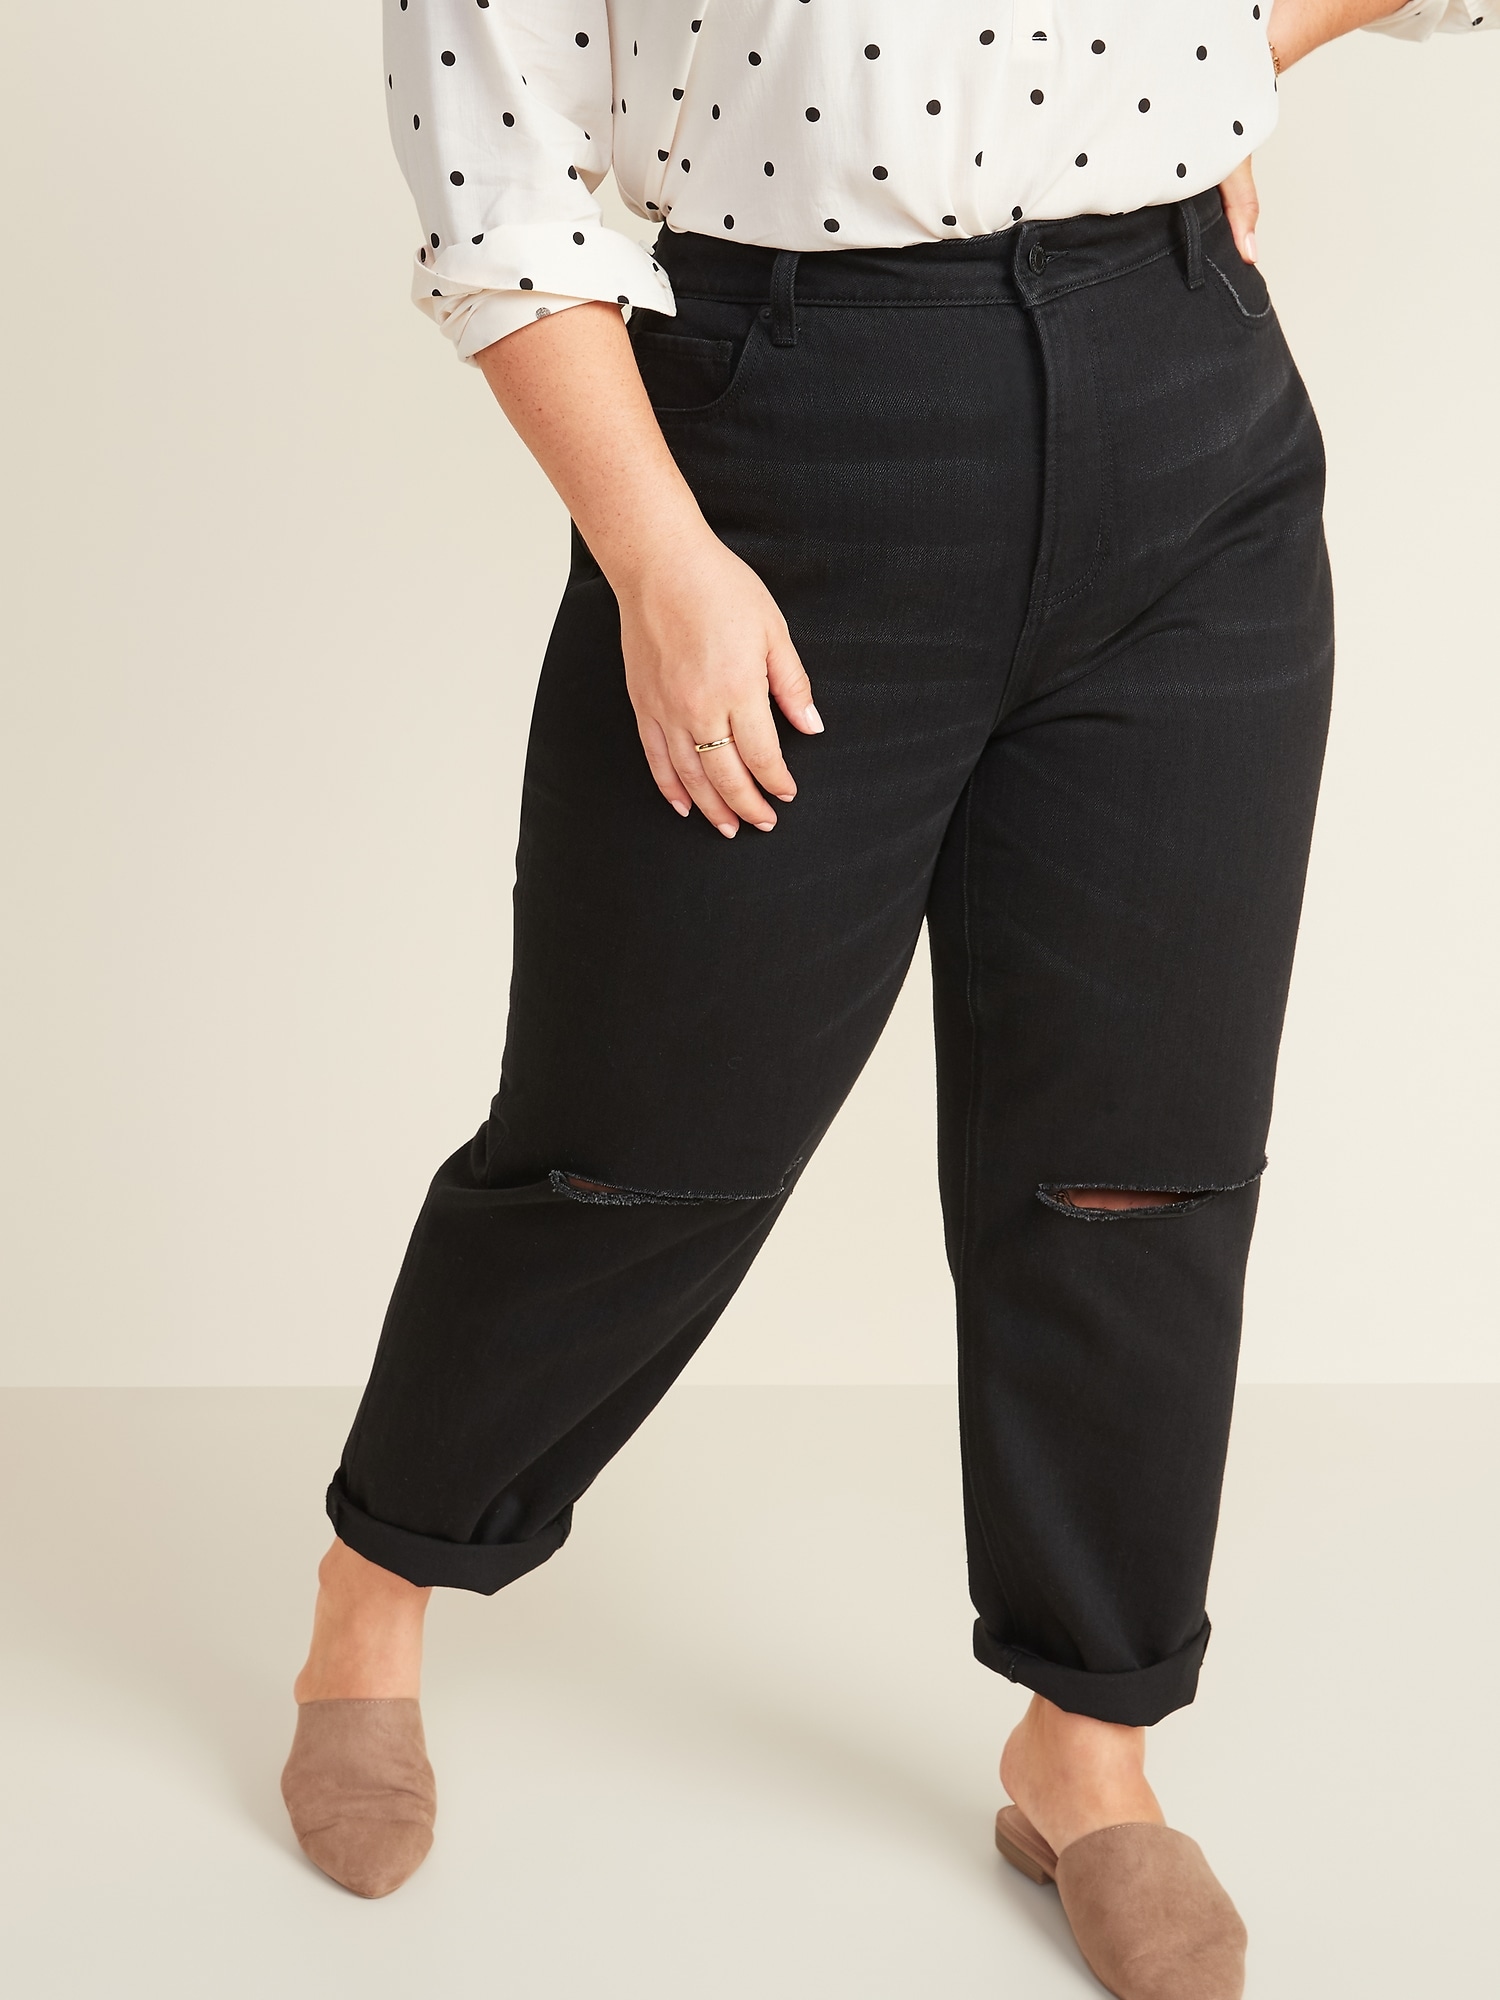 extra high waisted black jeans